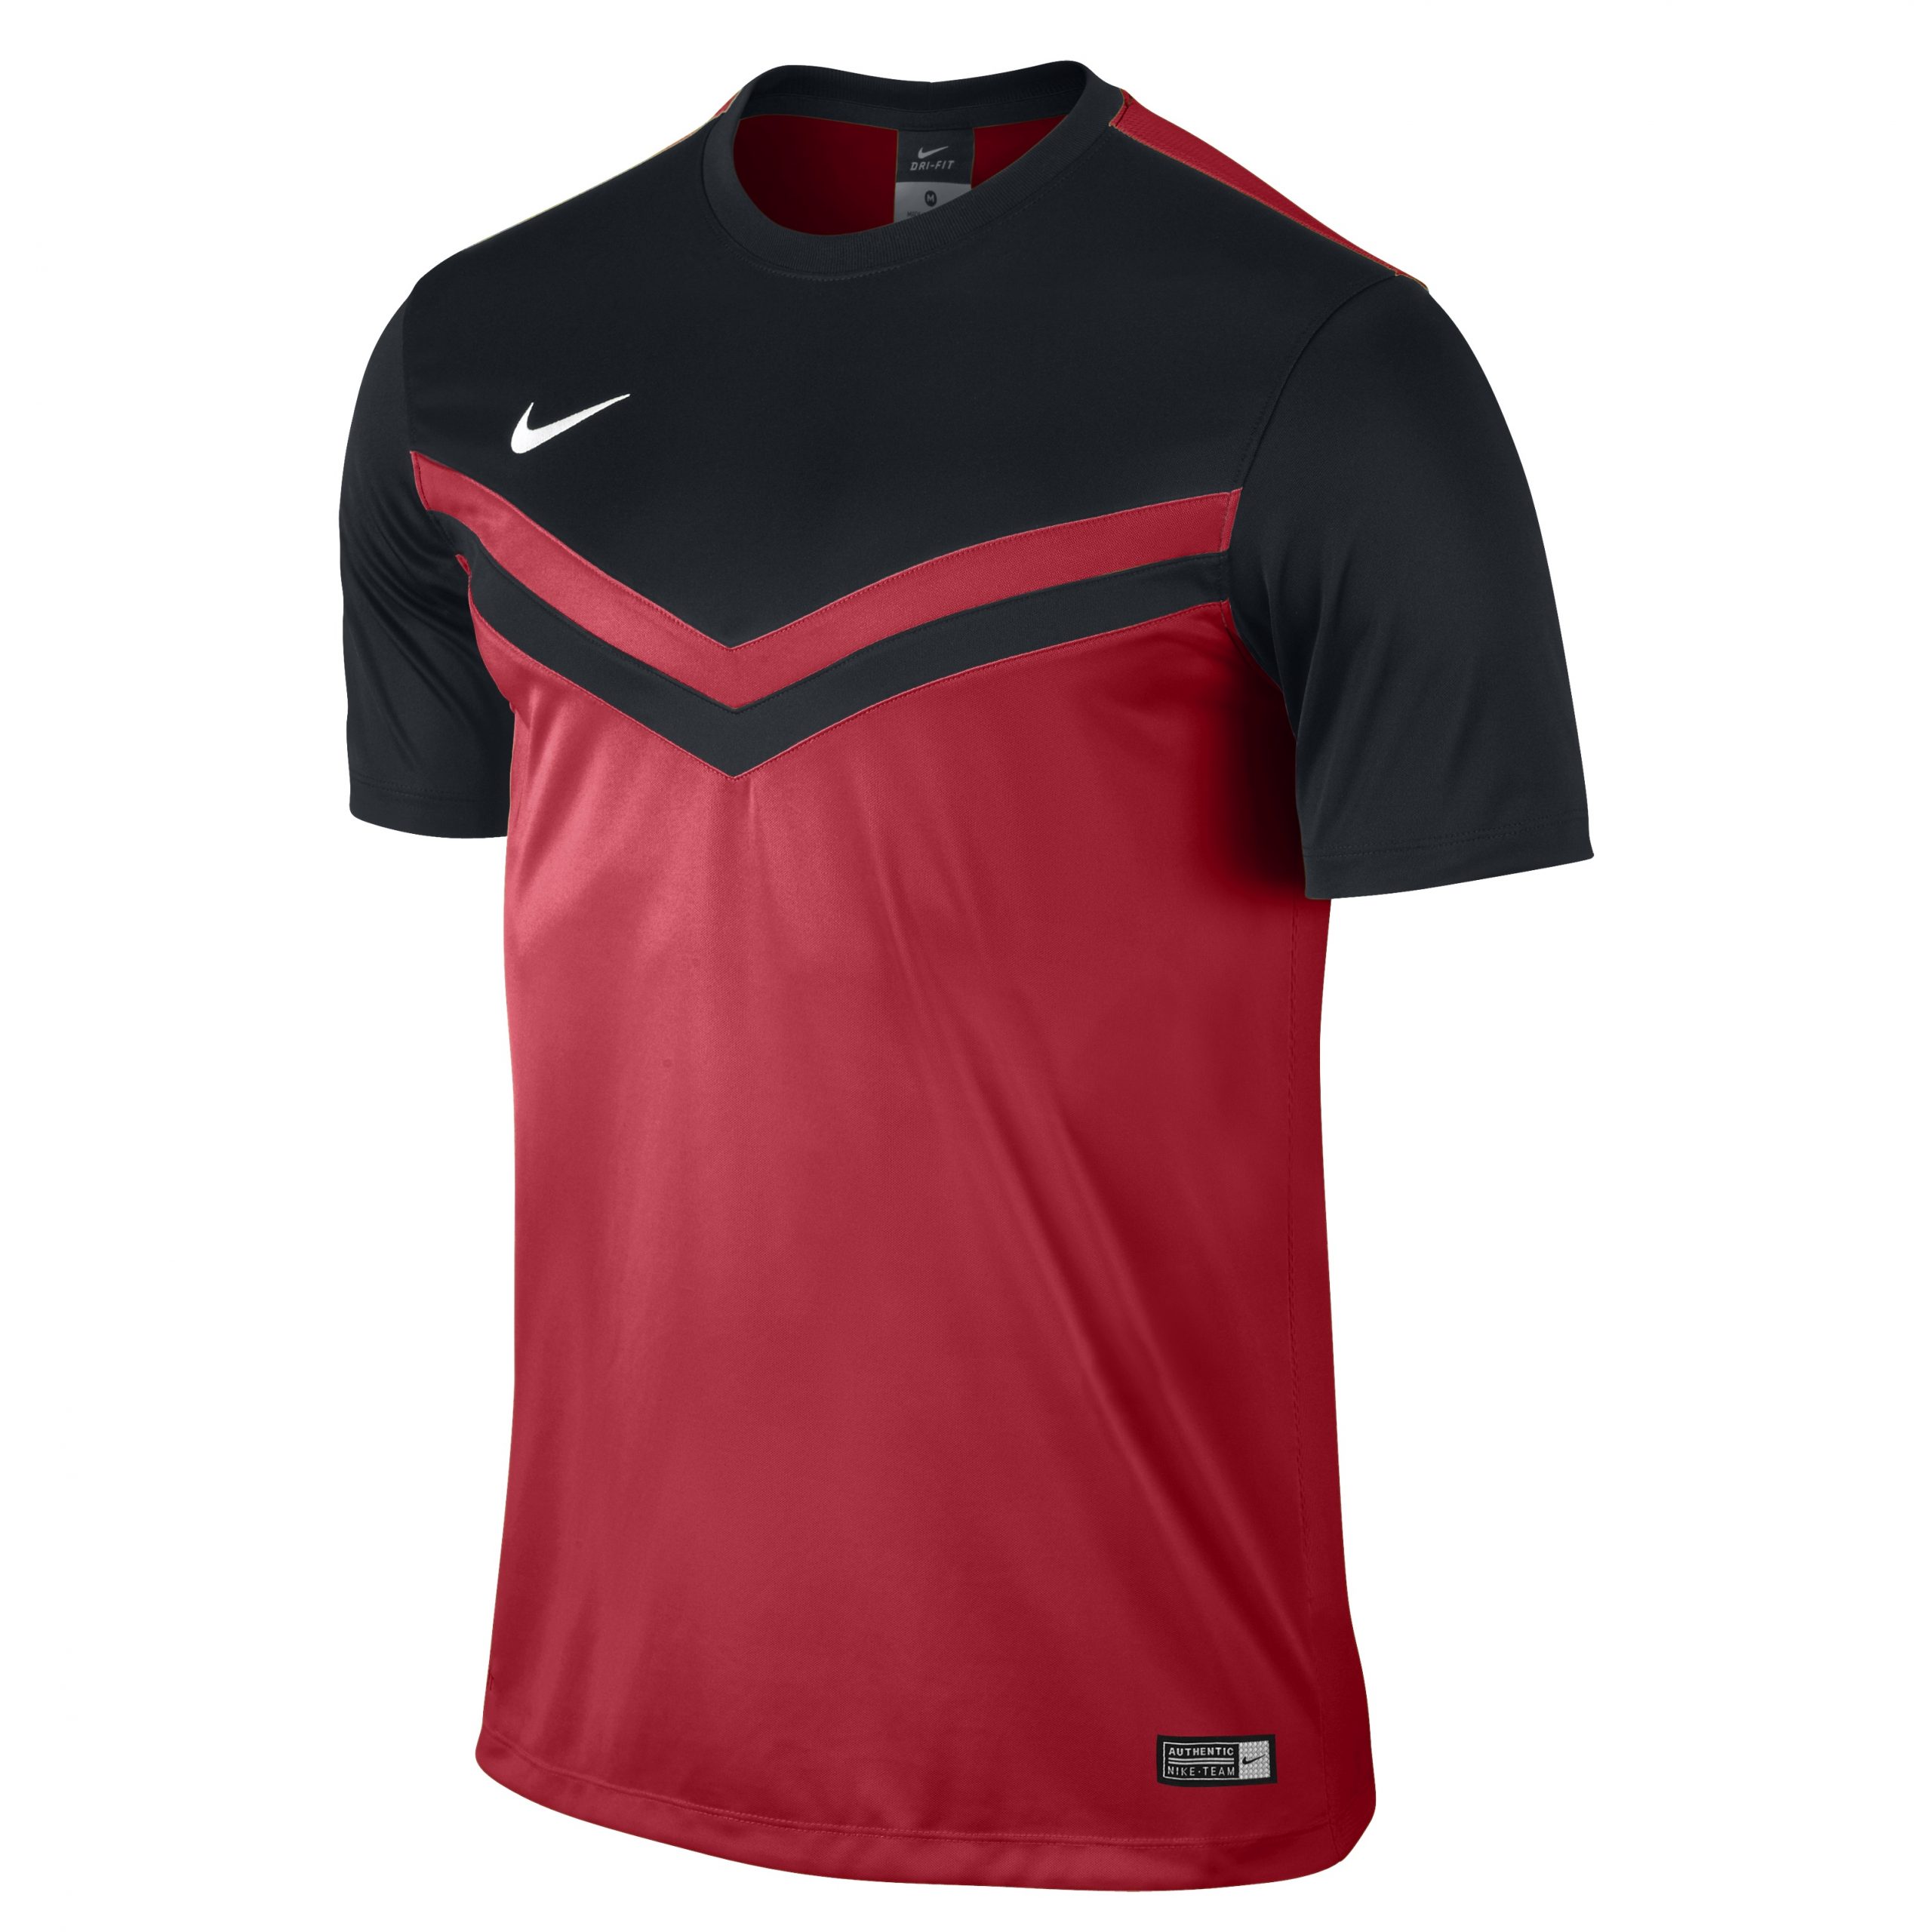 Nike Victory II Jersey (Red/Black) - The Football Factory